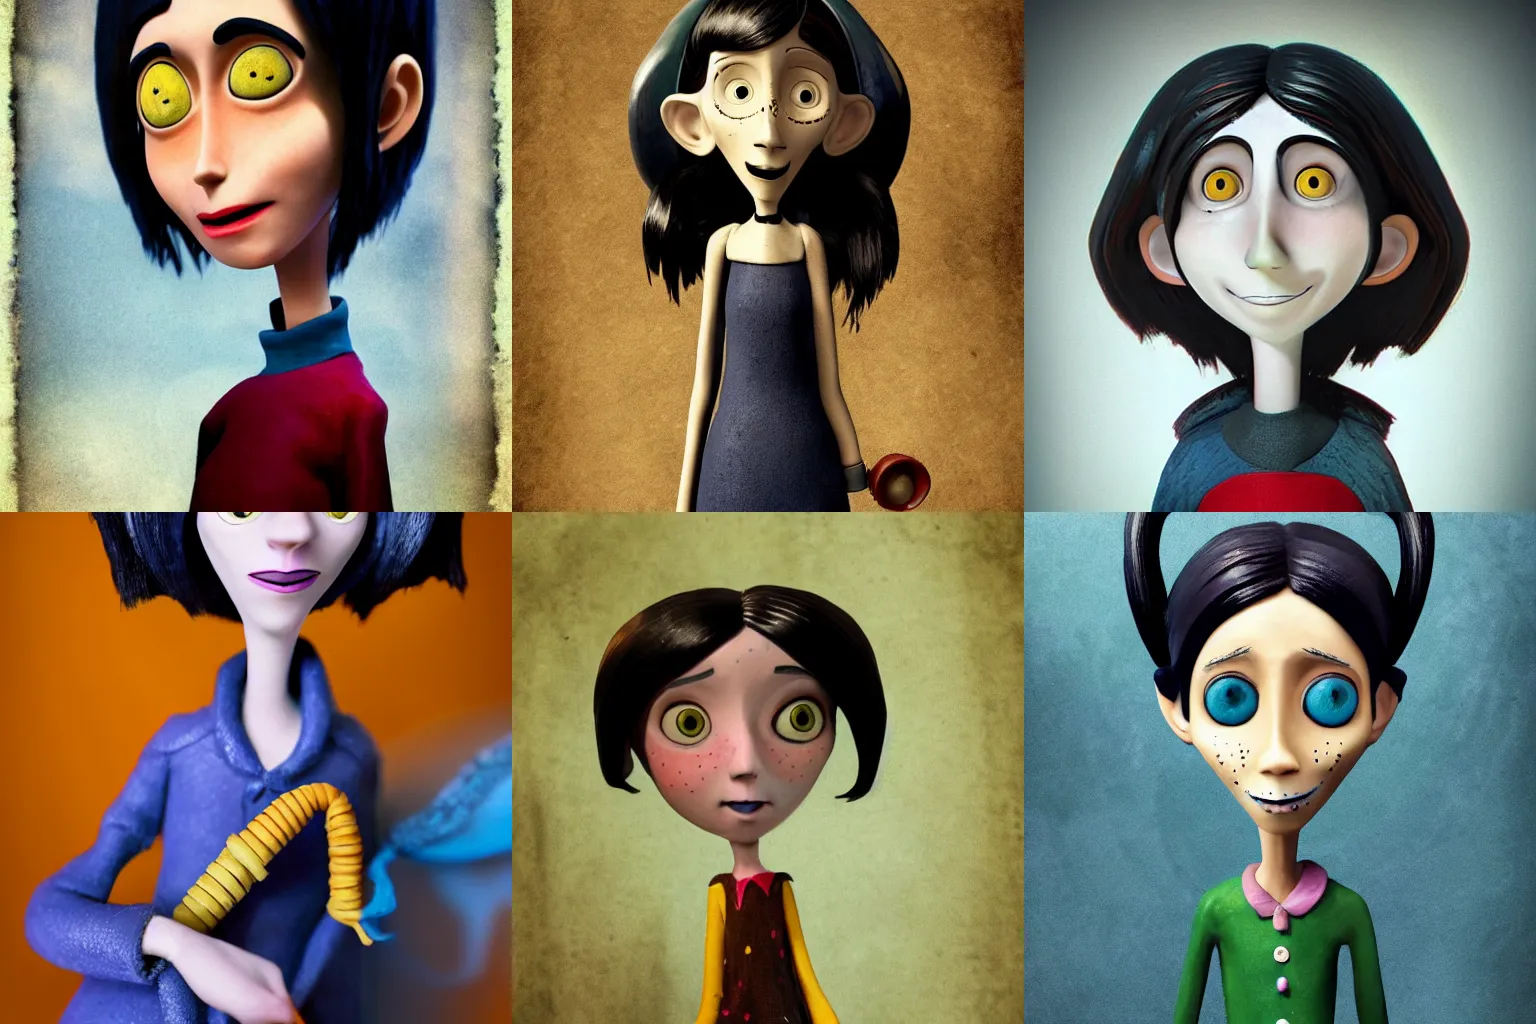 Prompt: an stylized portrait photo of coraline, beautiful stop motion character by laika studios